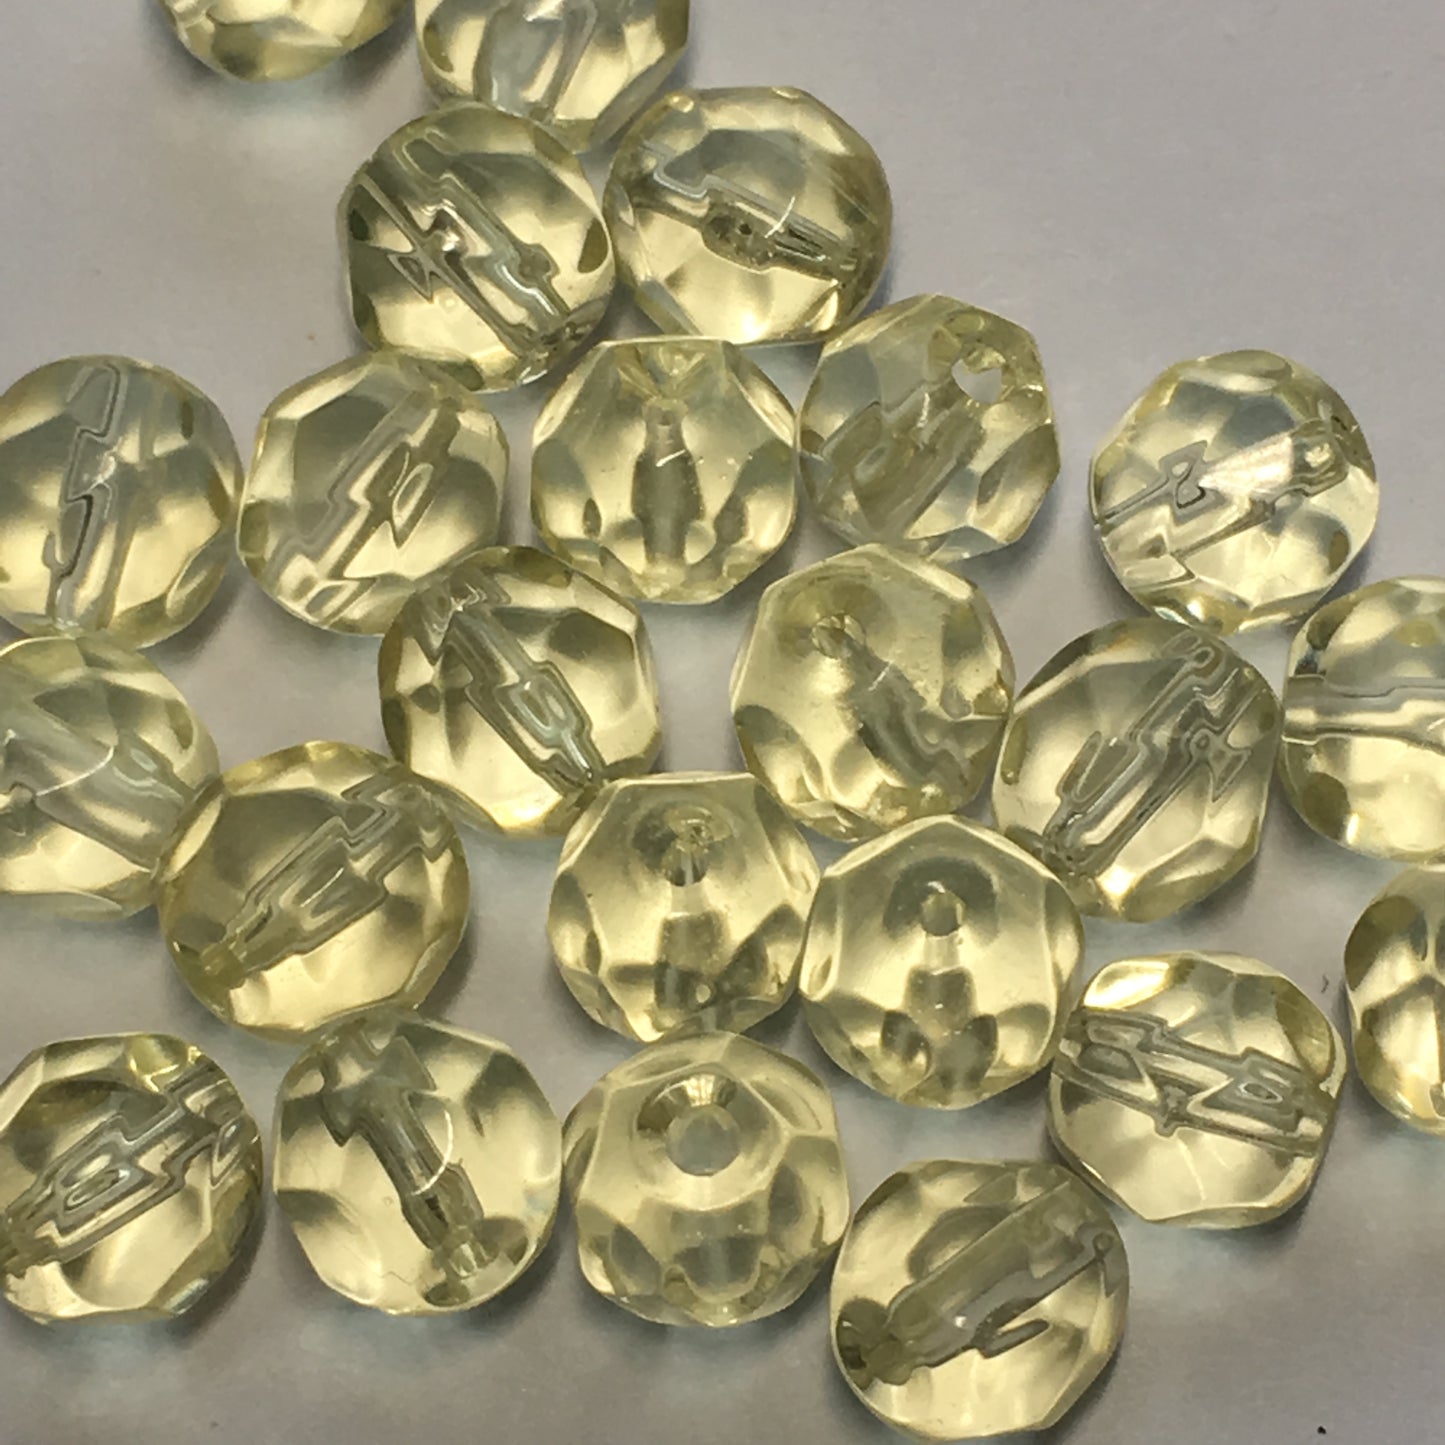 Czech Fire Polished Yellow Faceted Round Beads, 6 mm, 25 Beads